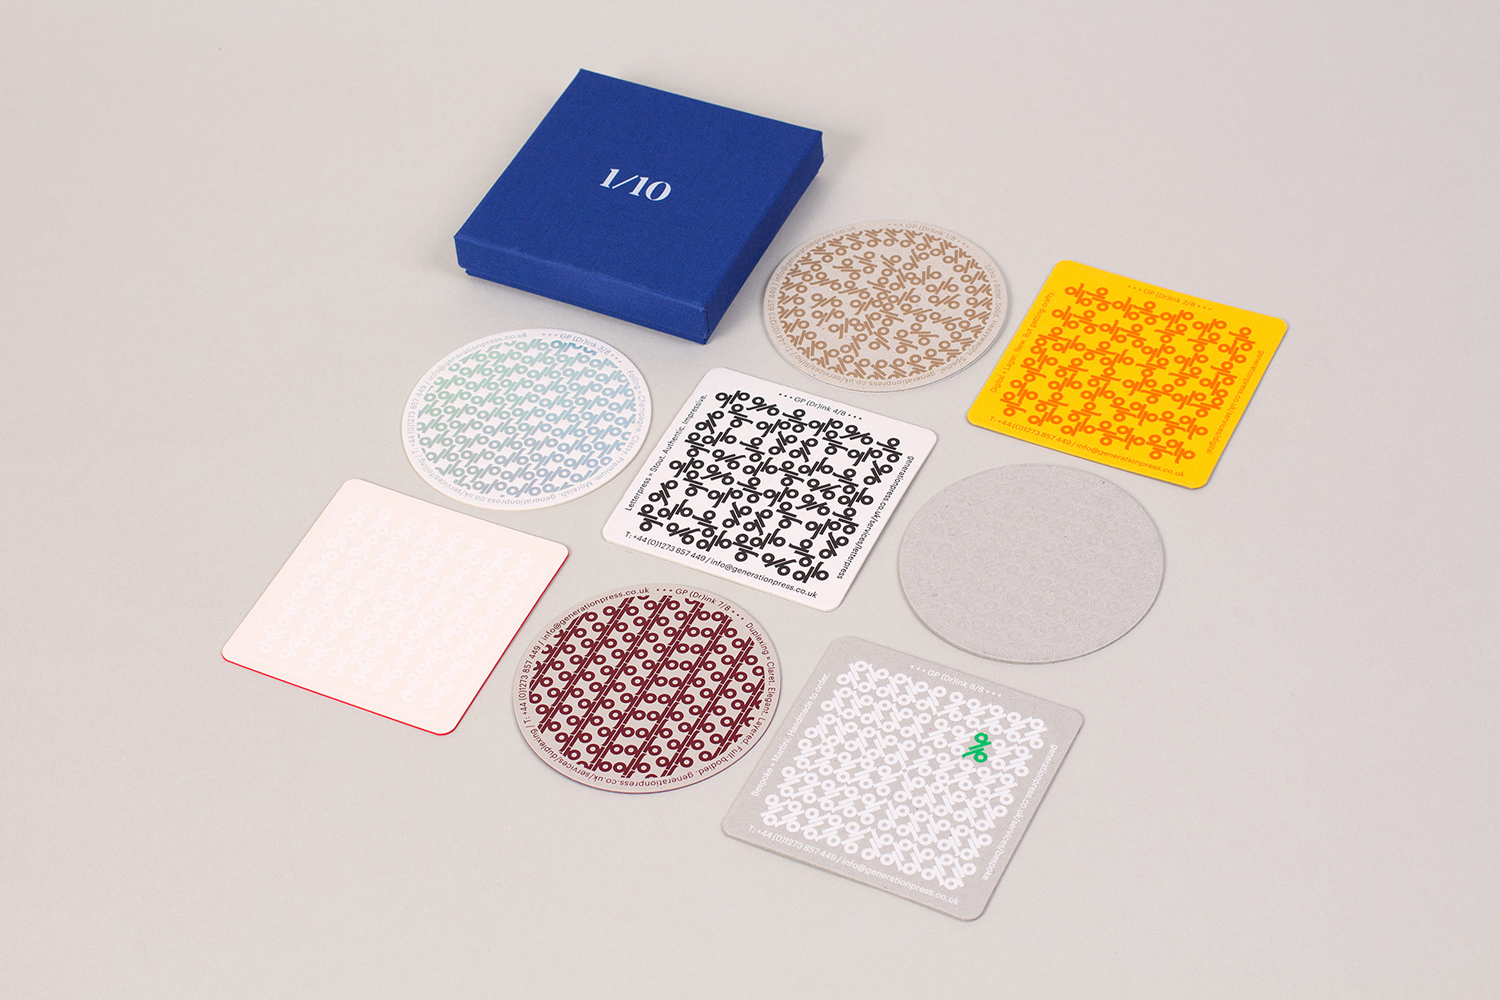 Generation Press Mail Campaign – Coasters by Build 